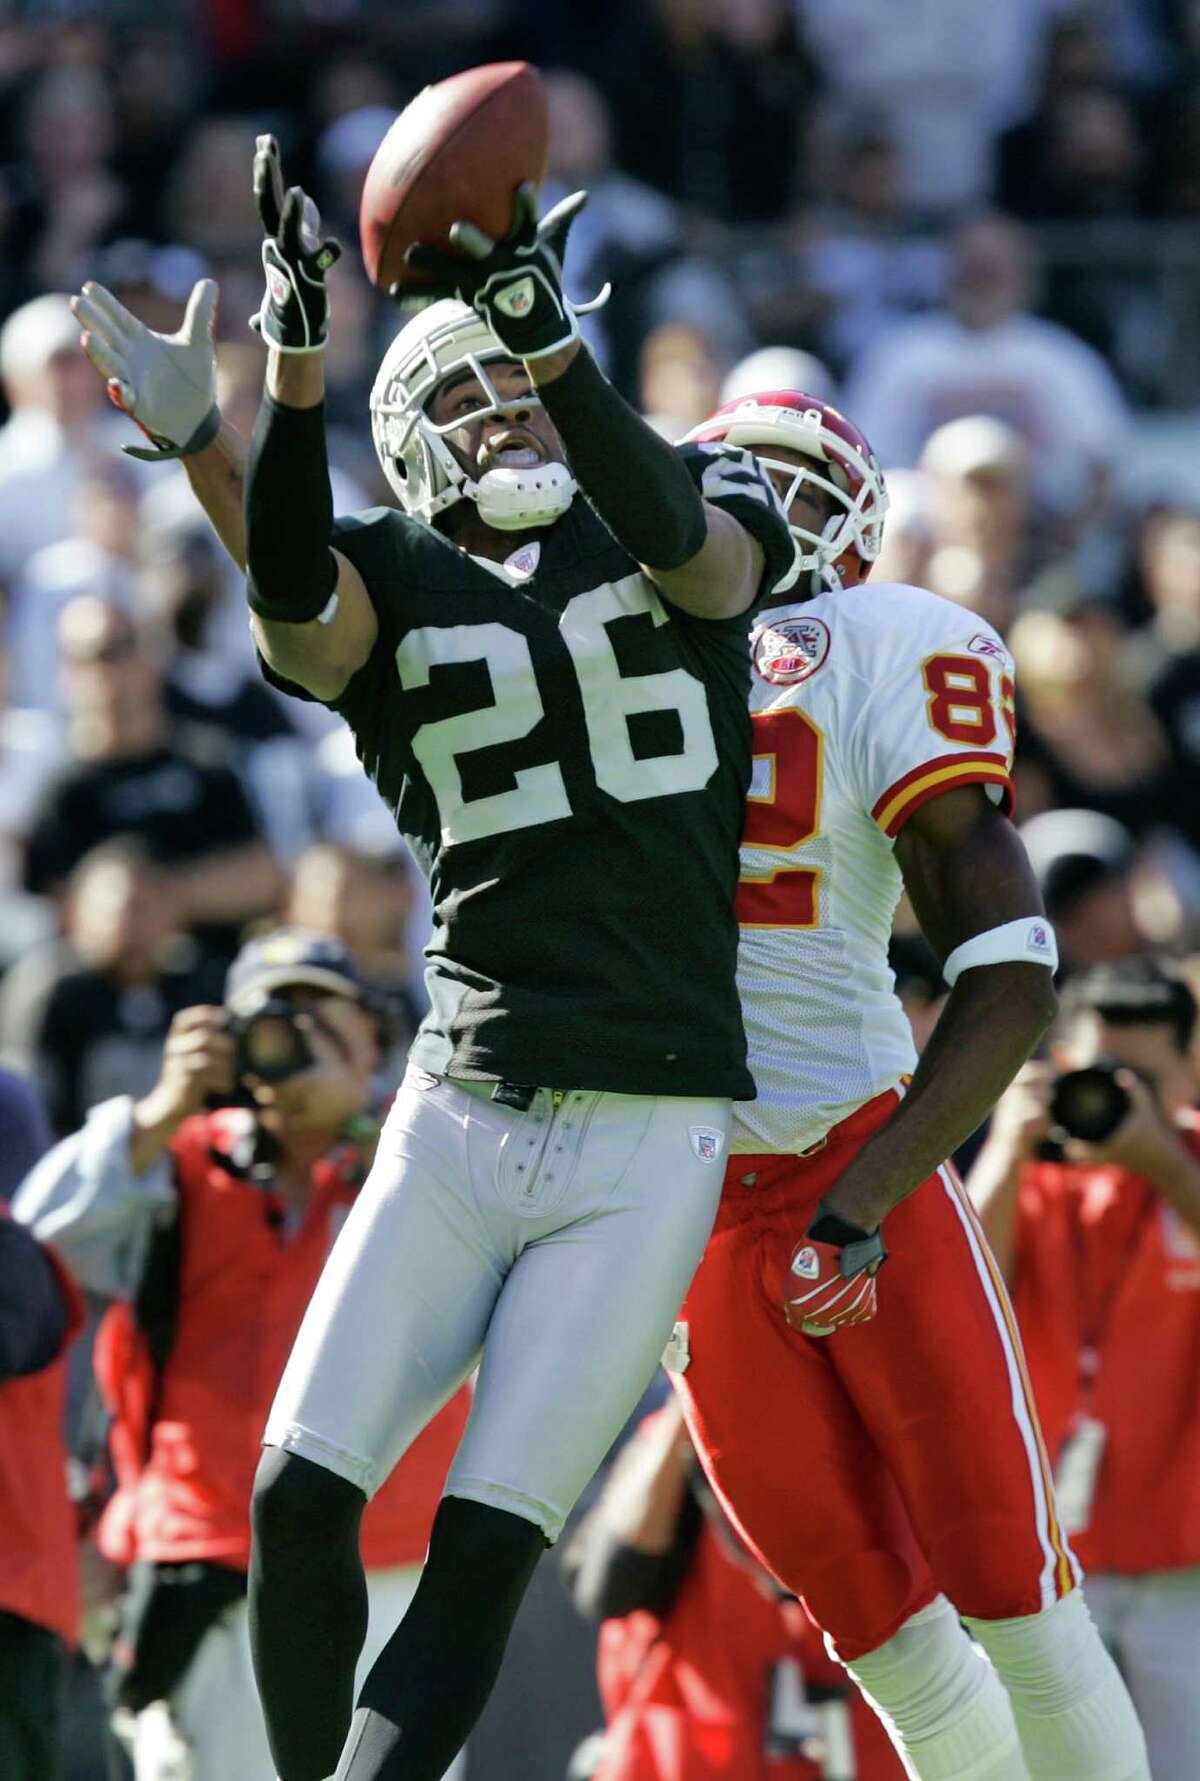 Oakland Raiders cornerback Stanford Routt (26) intercepts a pass intended for Kansas City Chiefs wide receiver Dwayne Bowe during the third quarter of an NFL football game in Oakland, Calif., Sunday, Oct. 21, 2007. Kansas City won, 12-10.